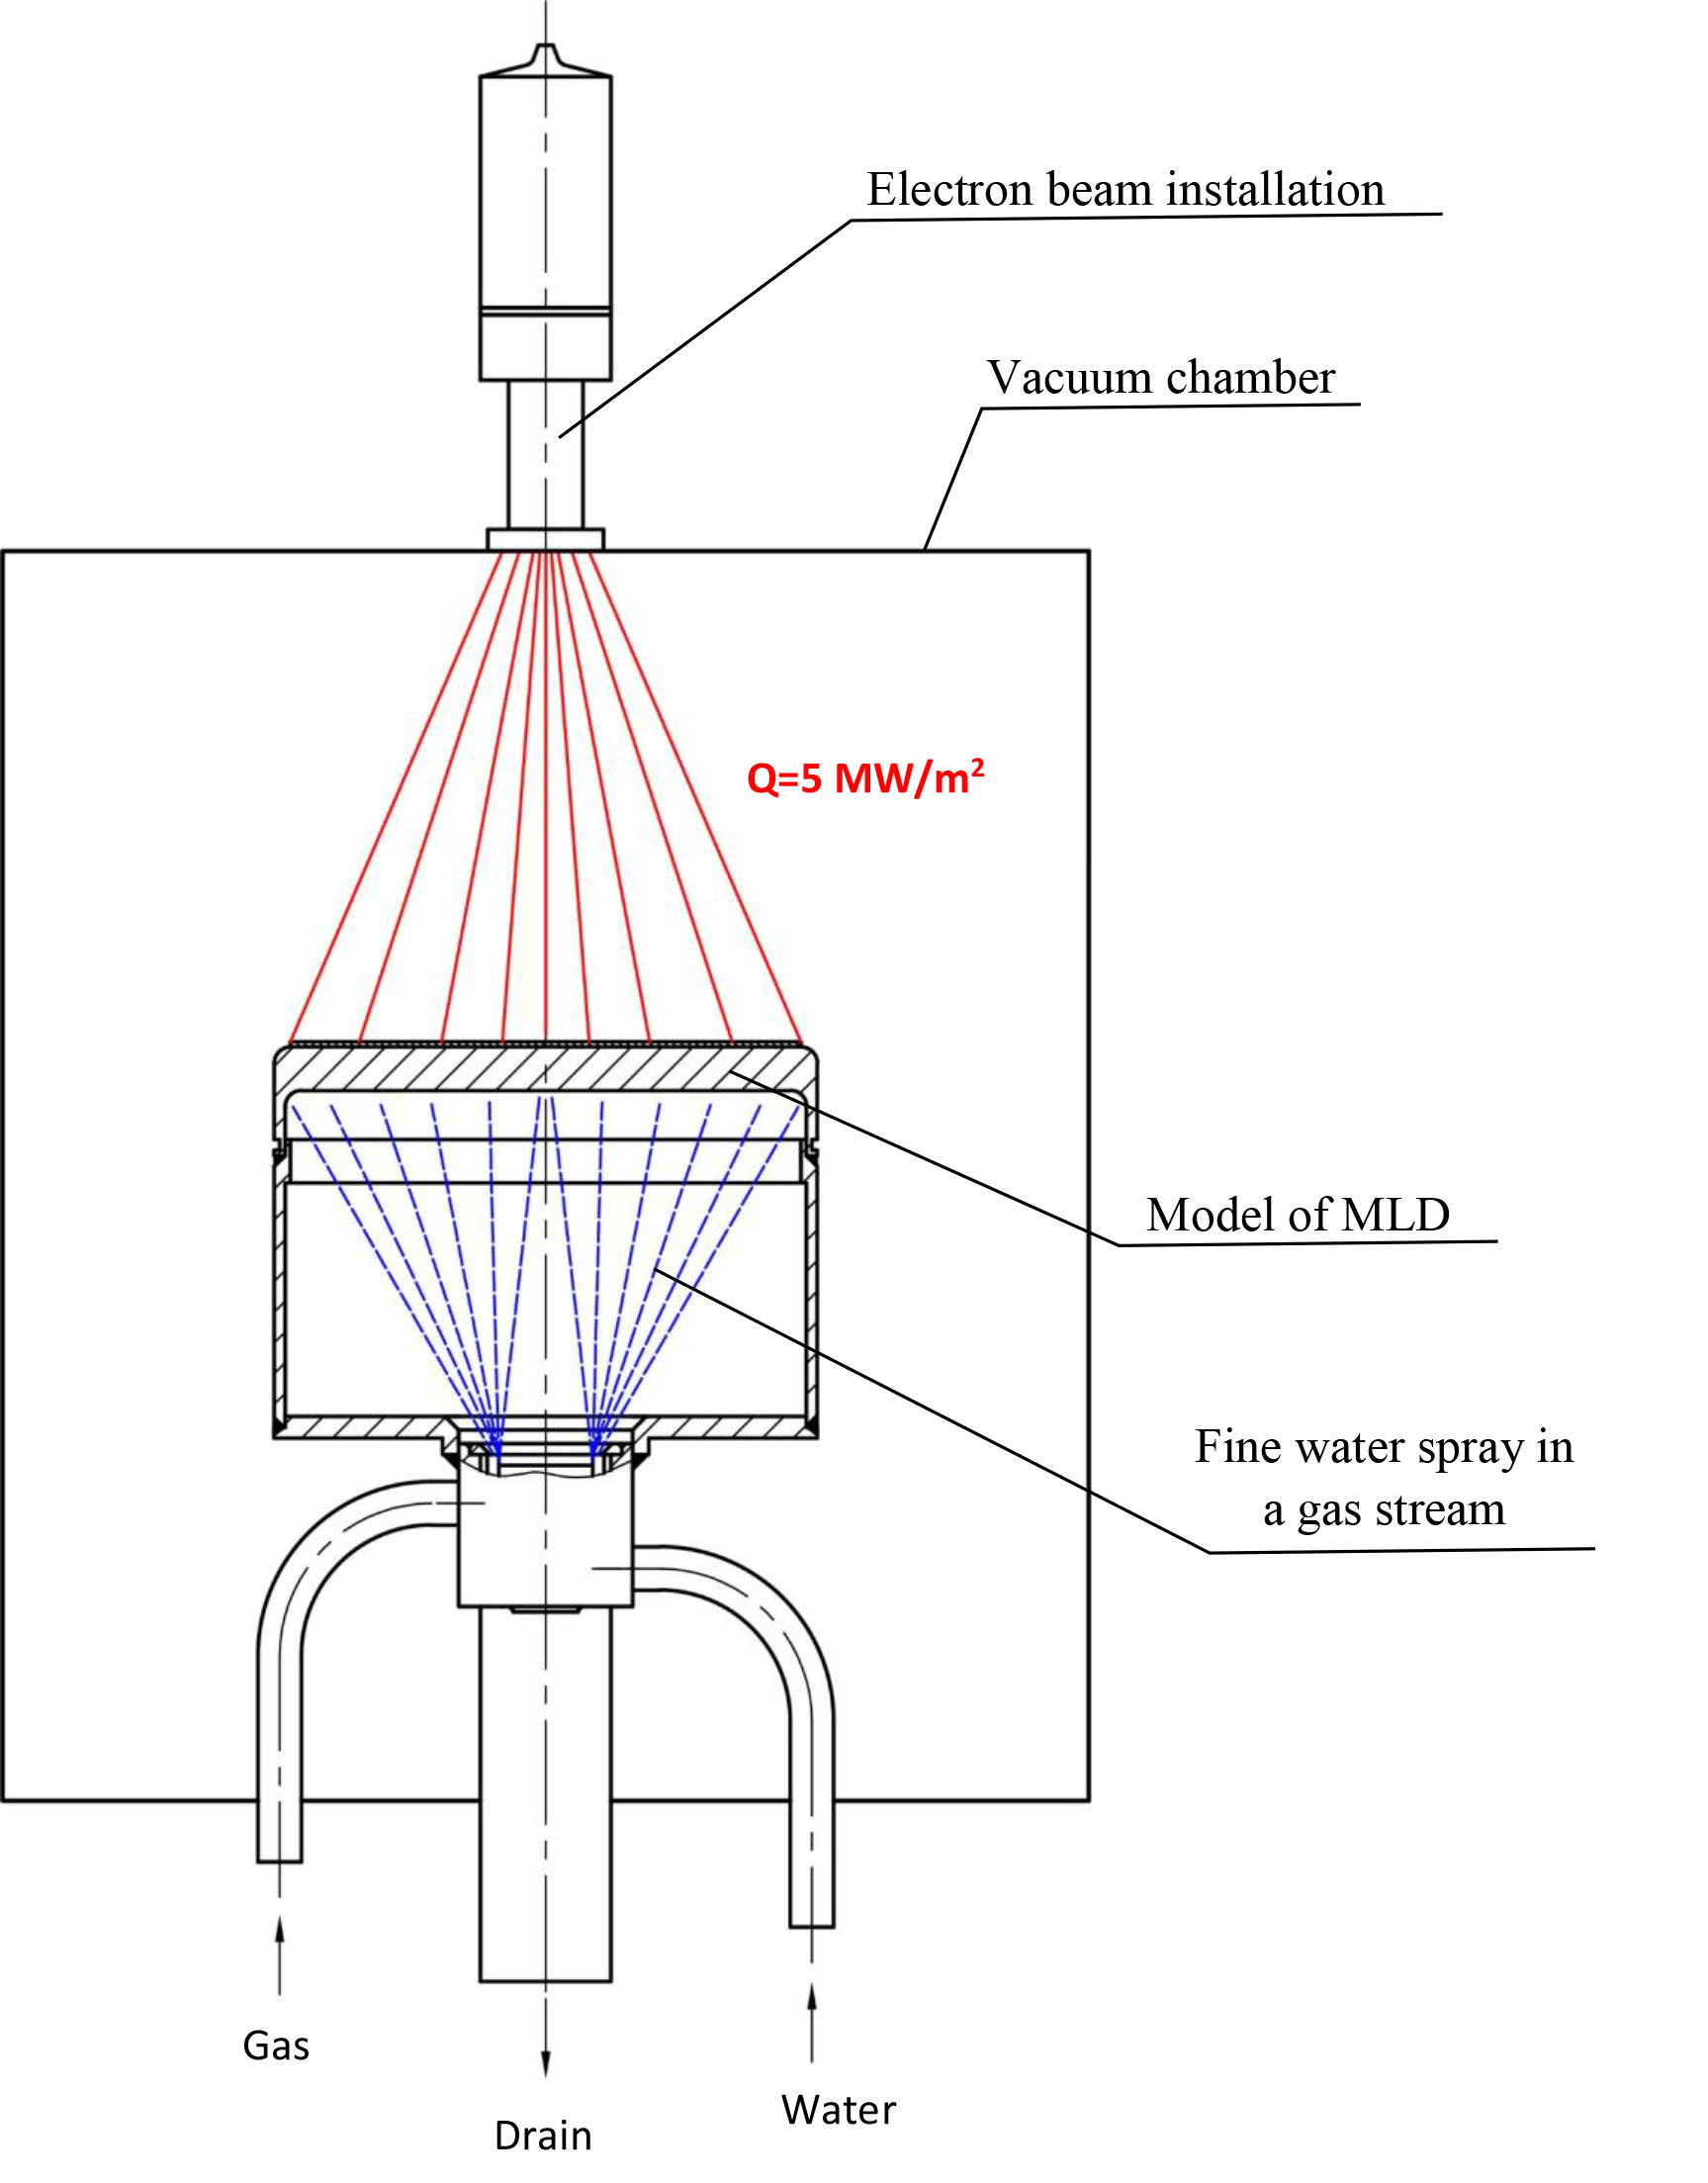 Scheme for testing the model of the tokamak lithium divertor target on an electron beam installation.